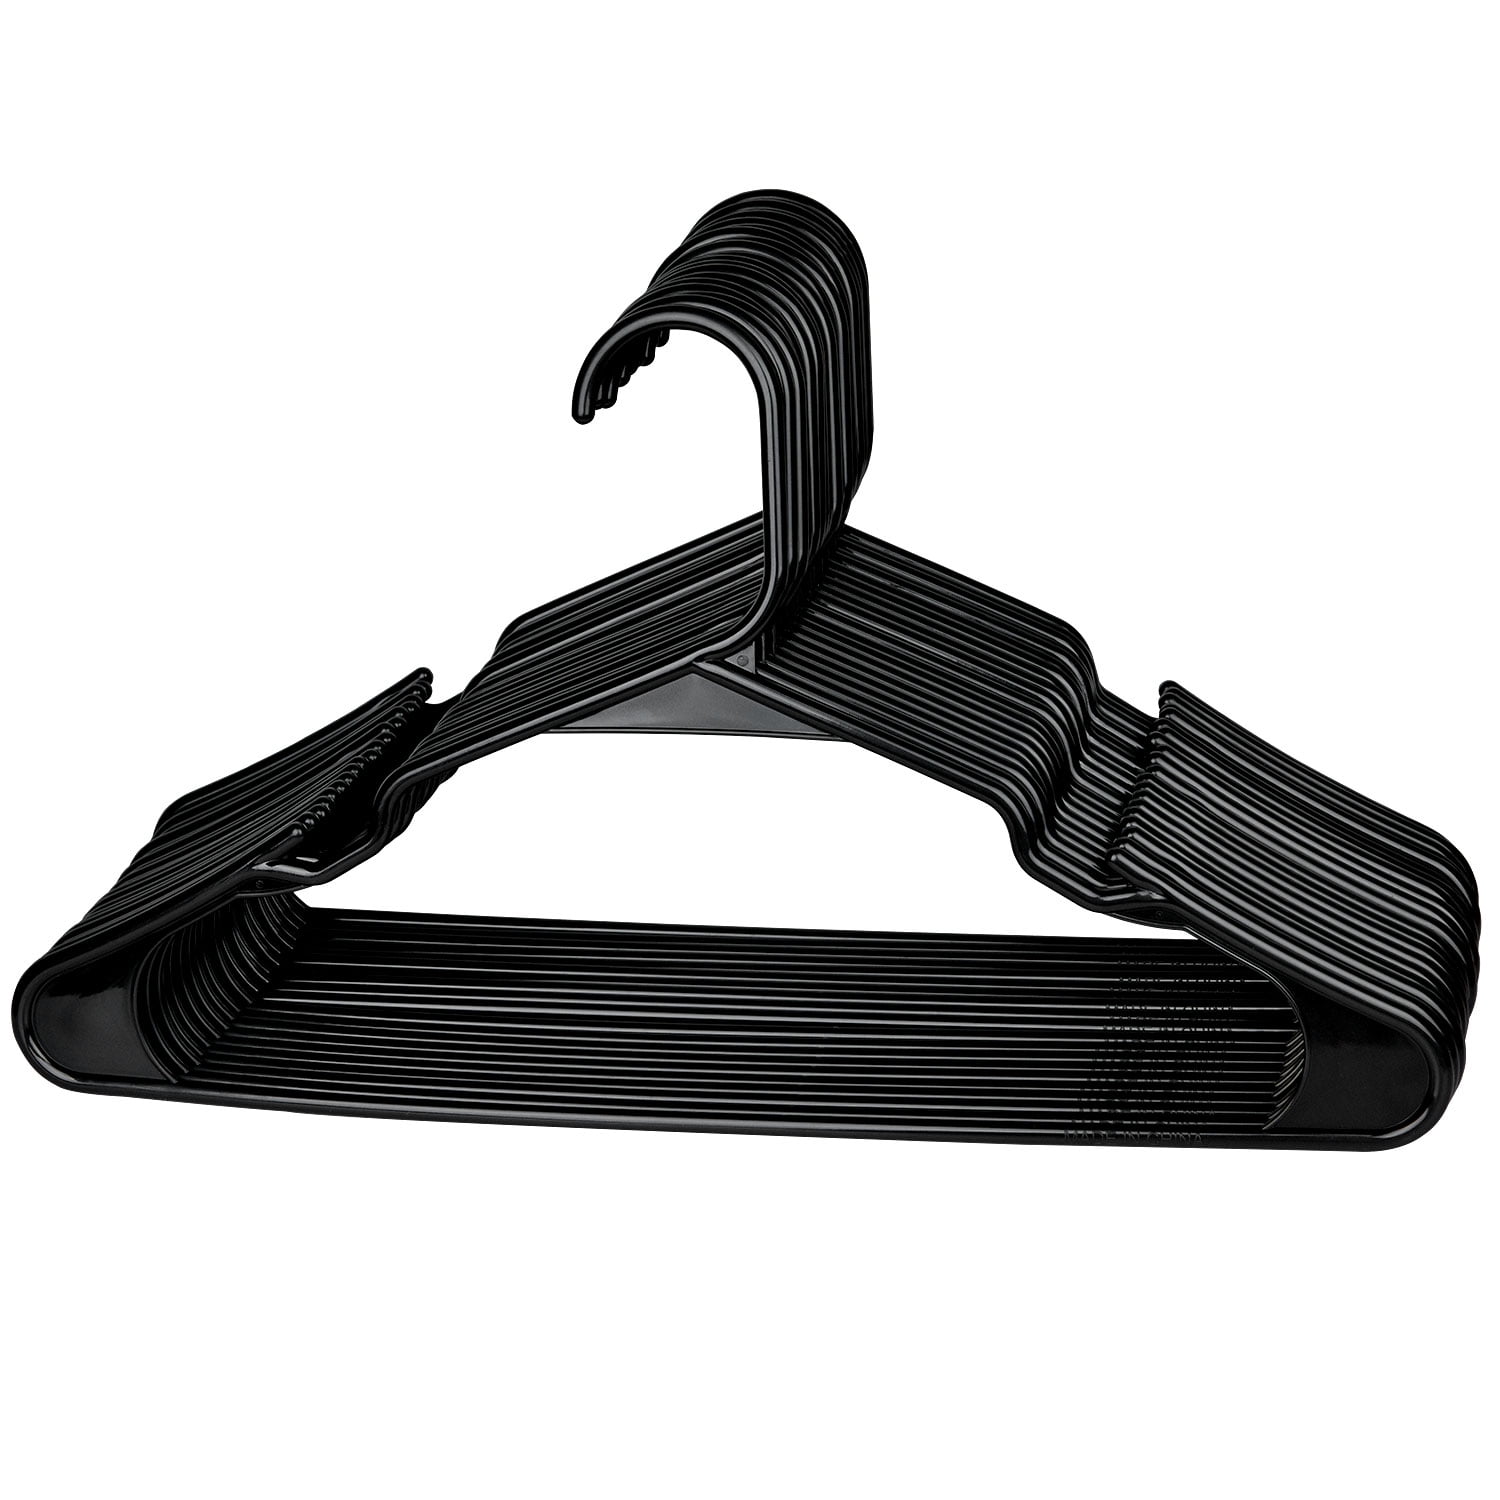 Coolmade Plastic Hangers Clothing Hangers Ideal for Everyday